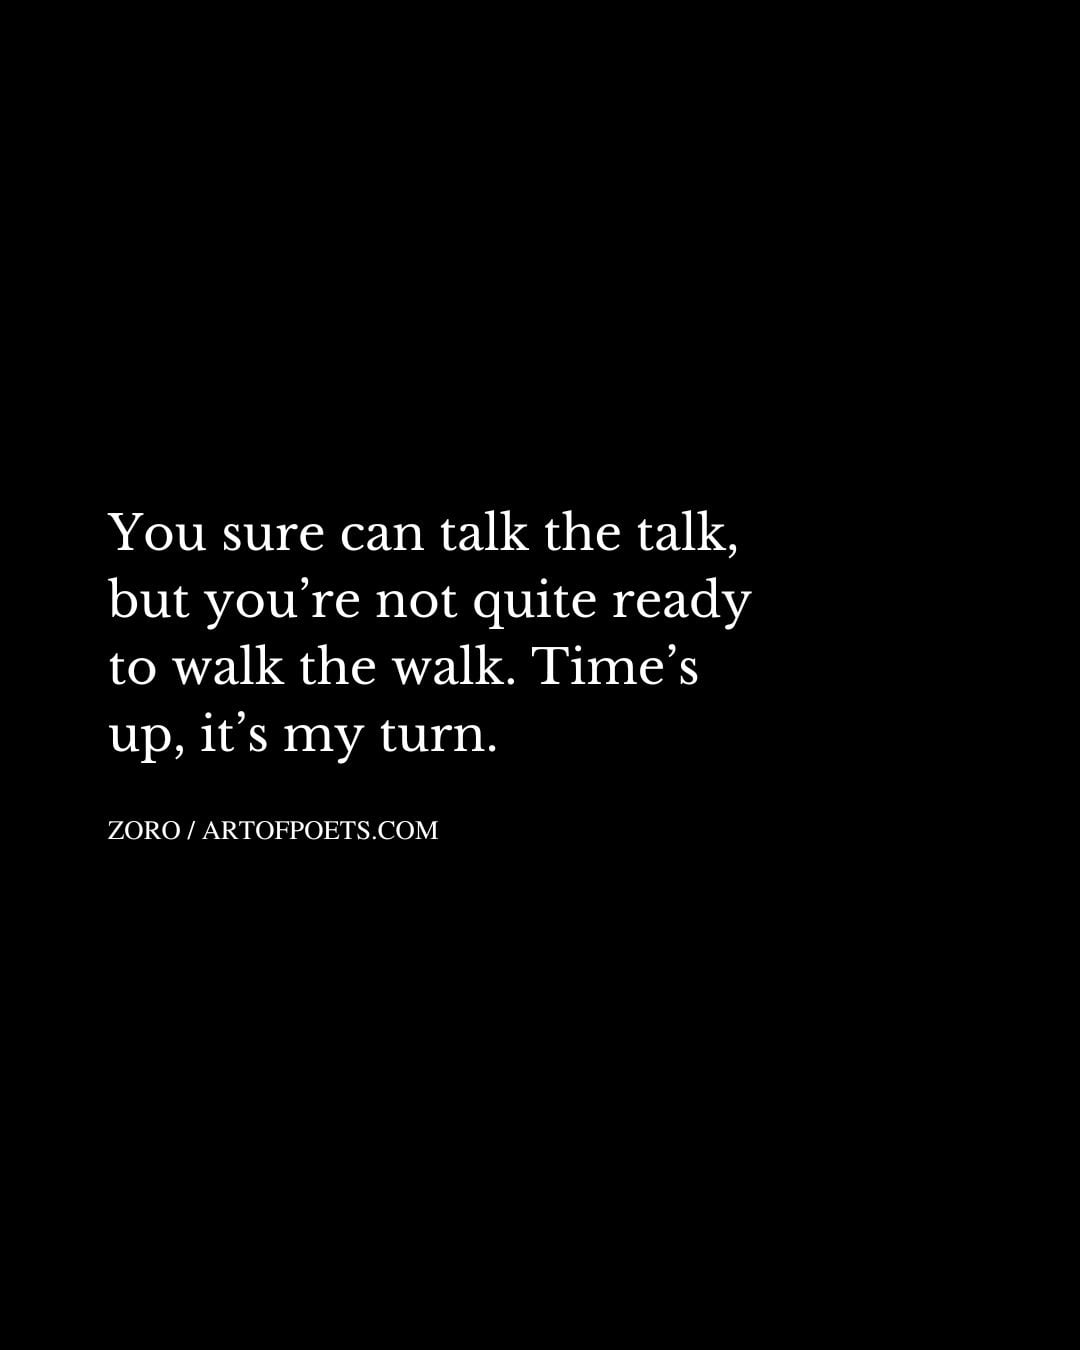 You sure can talk the talk but youre not quite ready to walk the walk. Times up its my turn